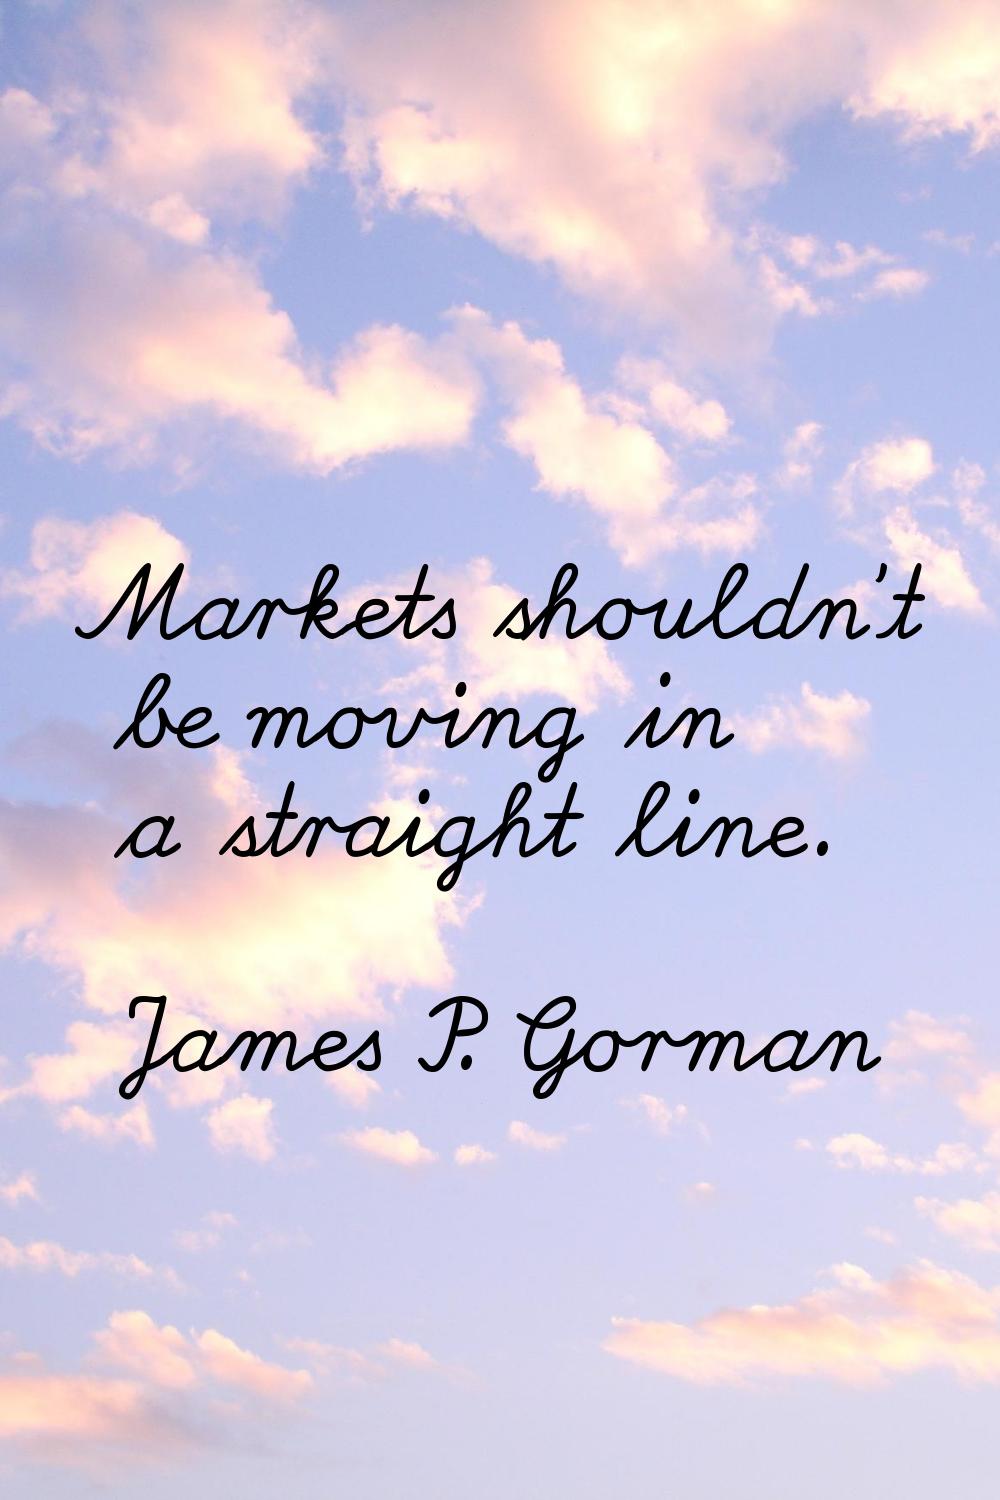 Markets shouldn't be moving in a straight line.